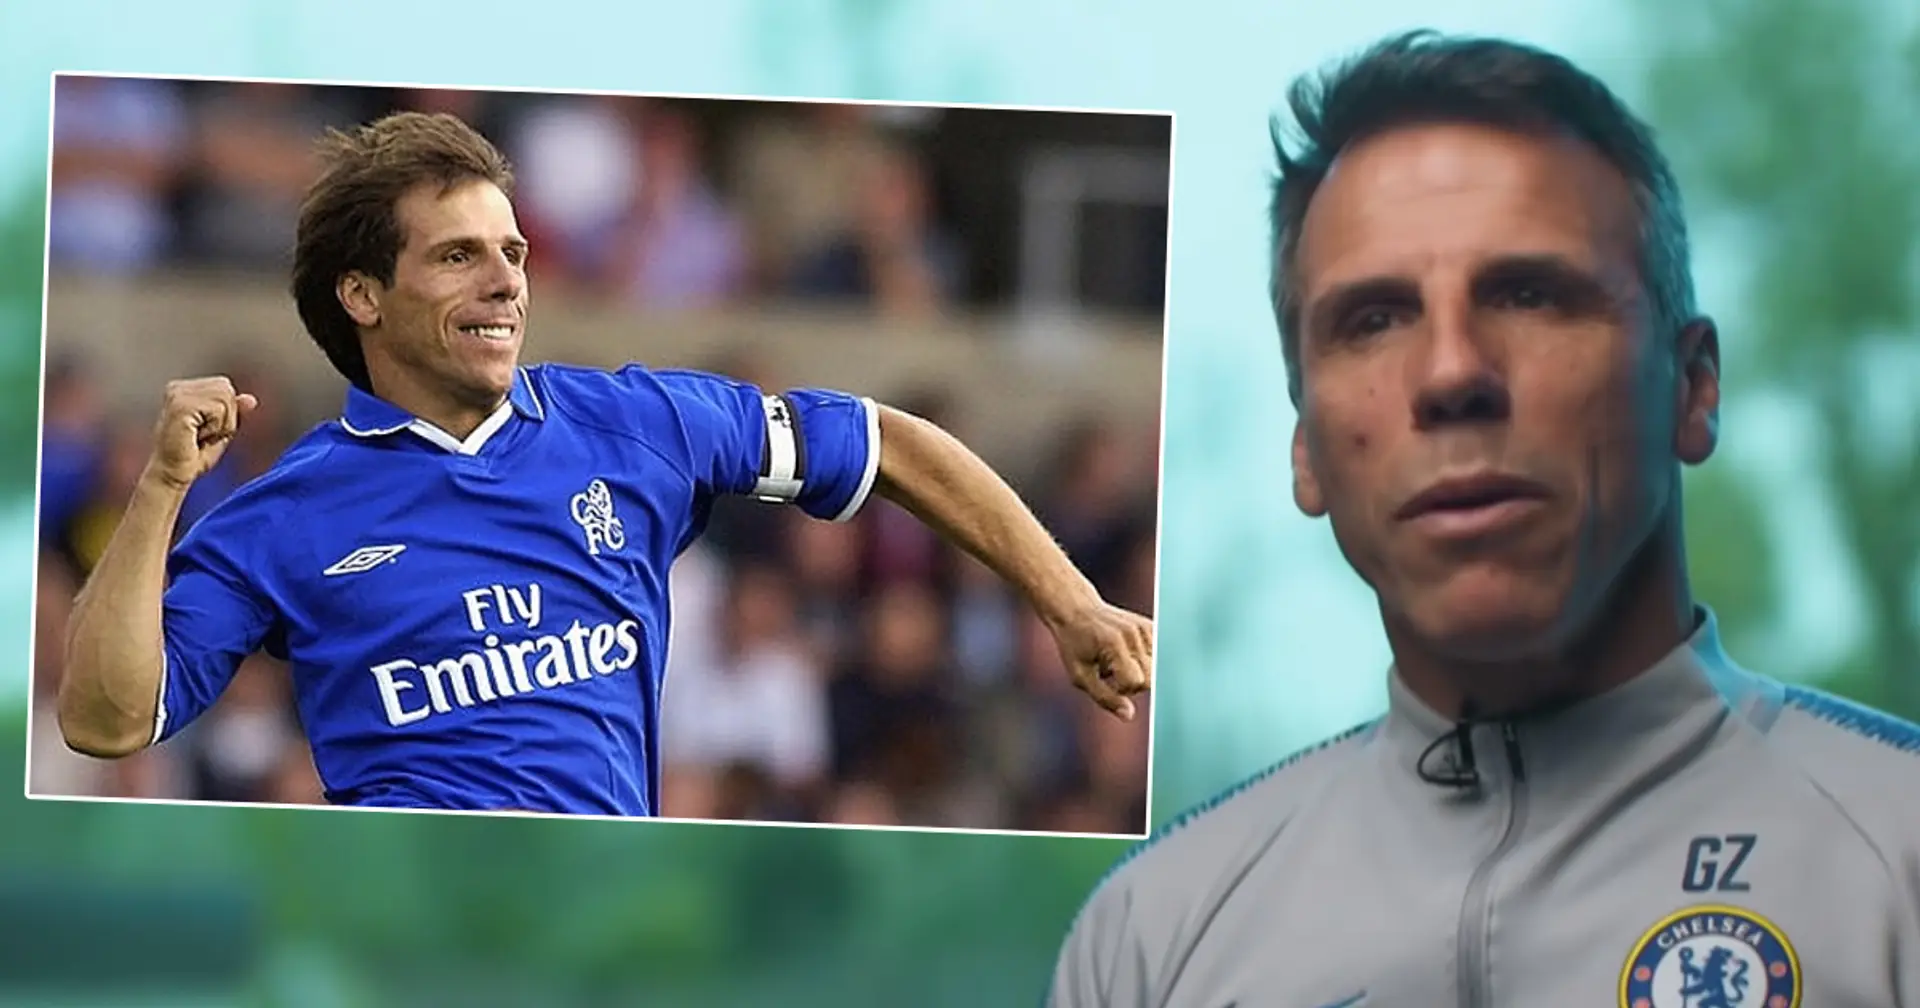 Gianfranco Zola labels time at Chelsea 'most beautiful moment of my career'